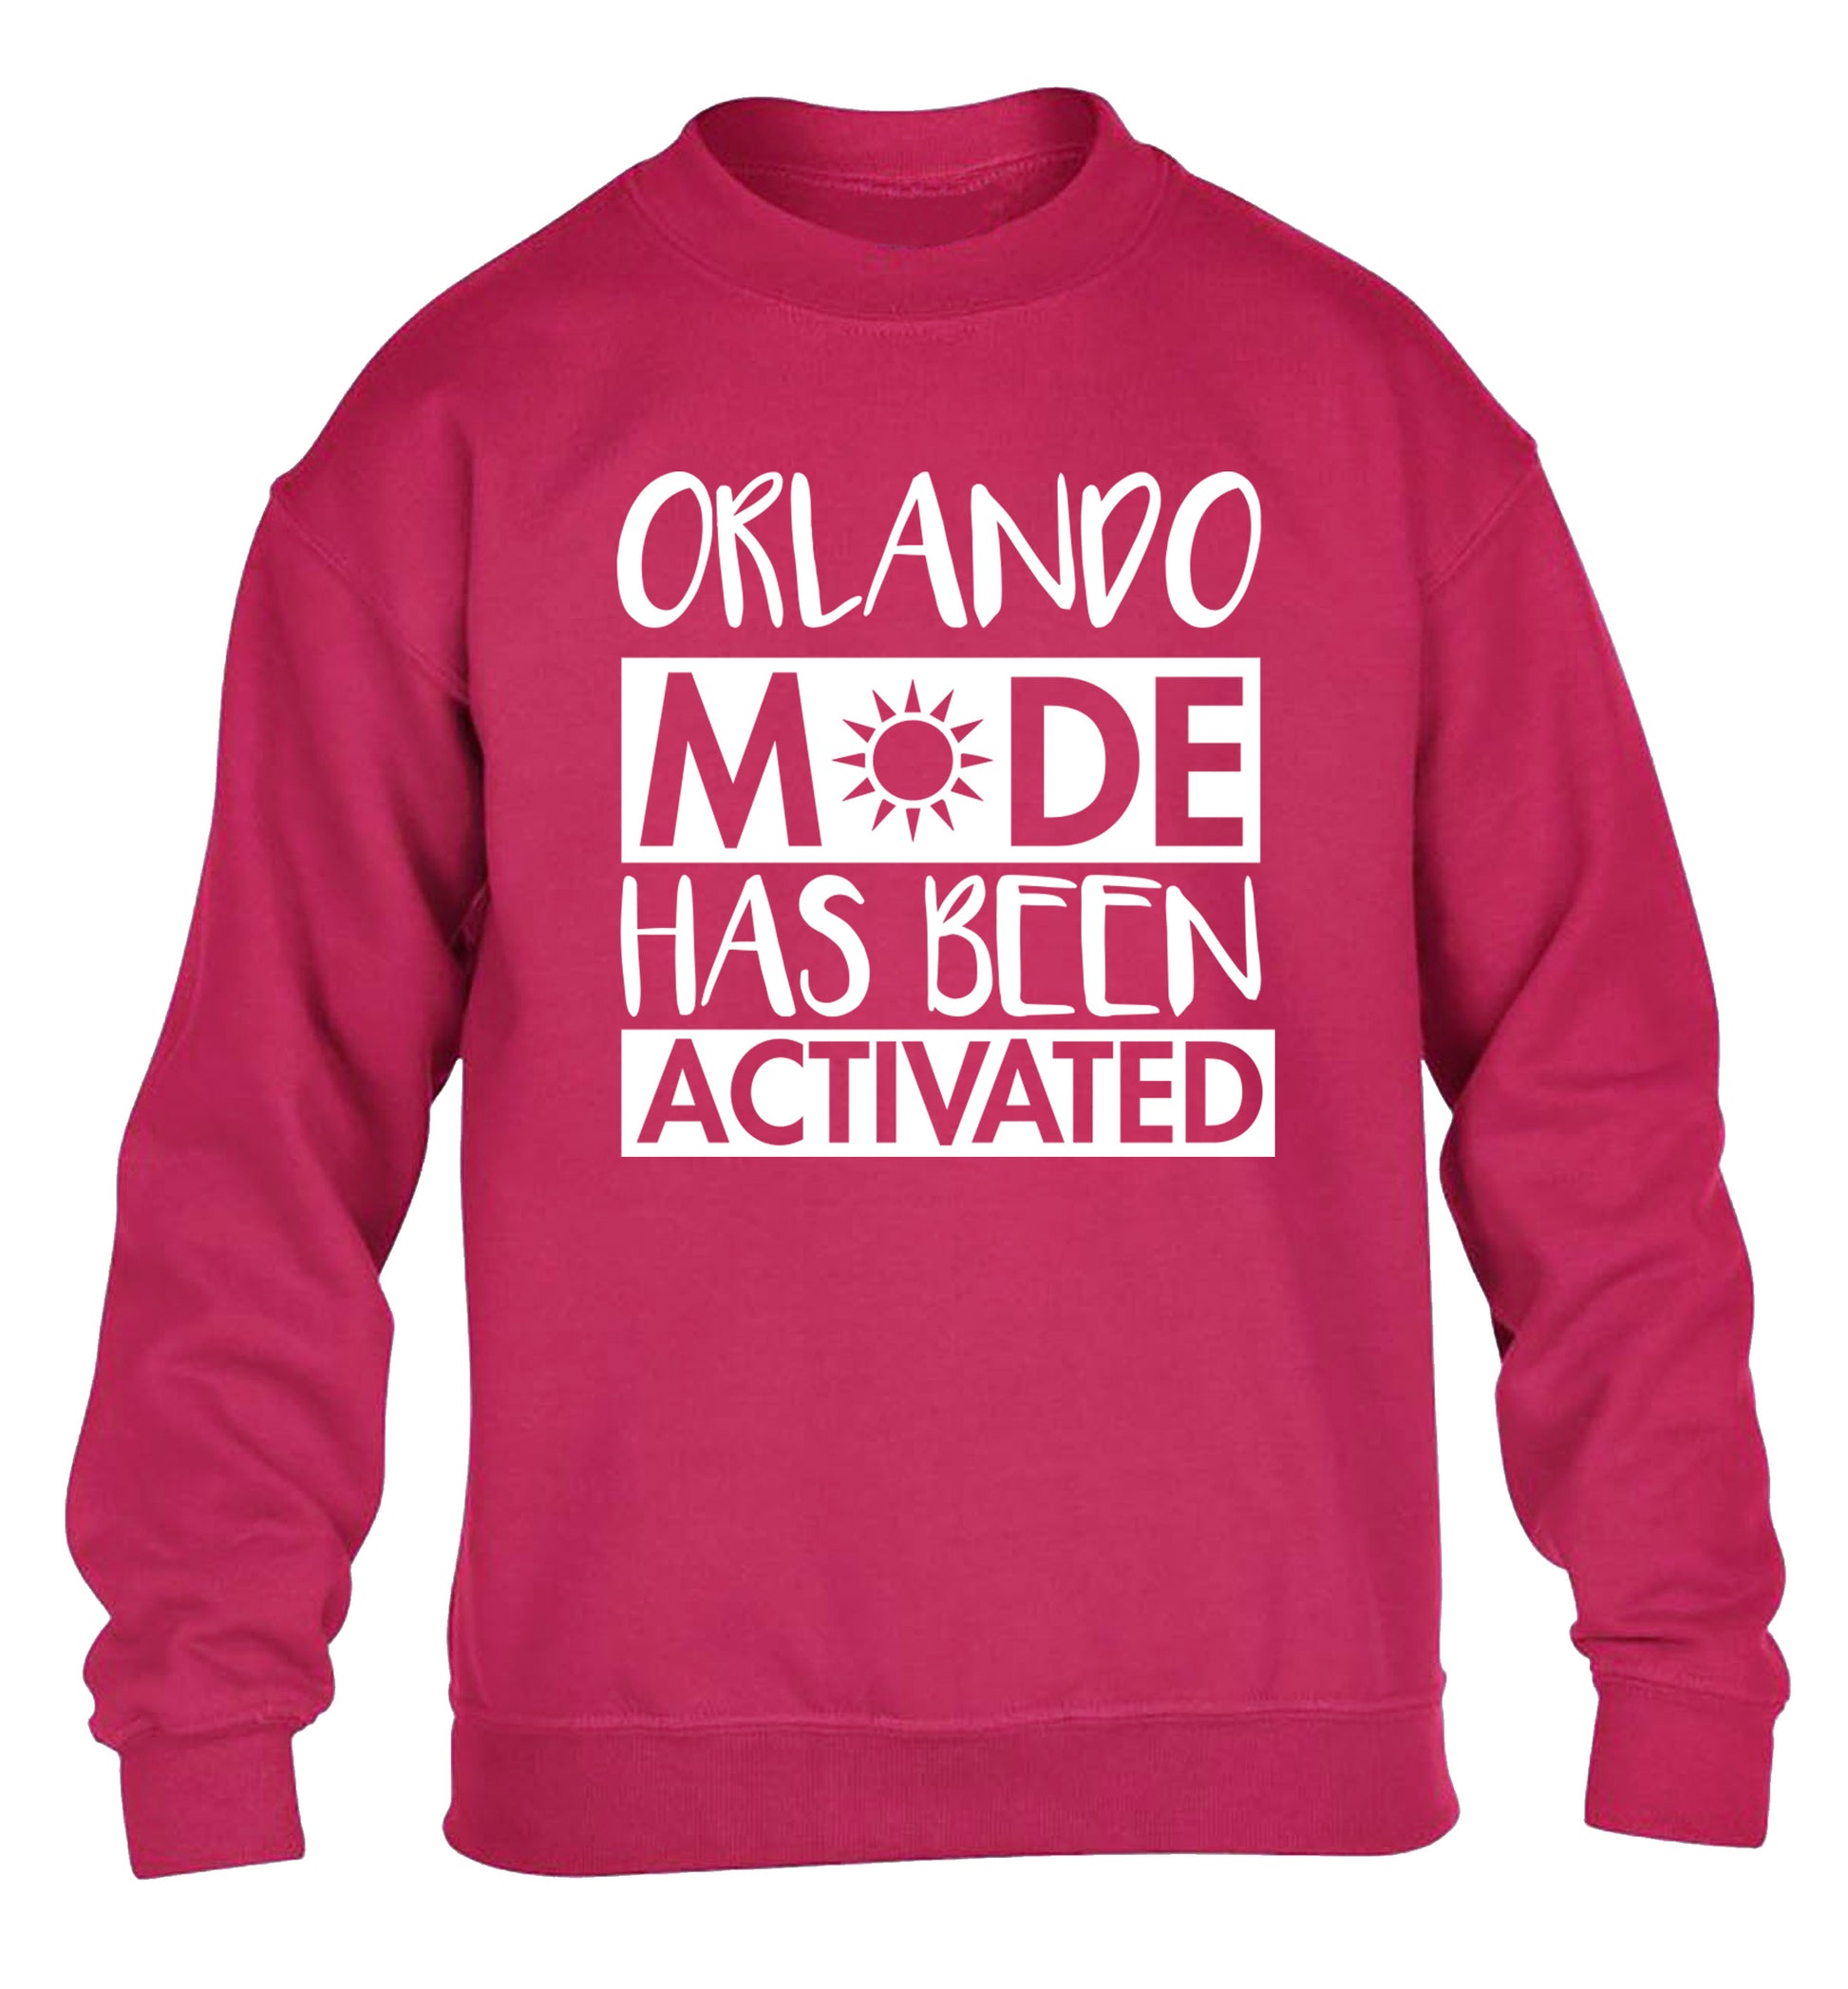 Orlando mode has been activated children's pink sweater 12-13 Years